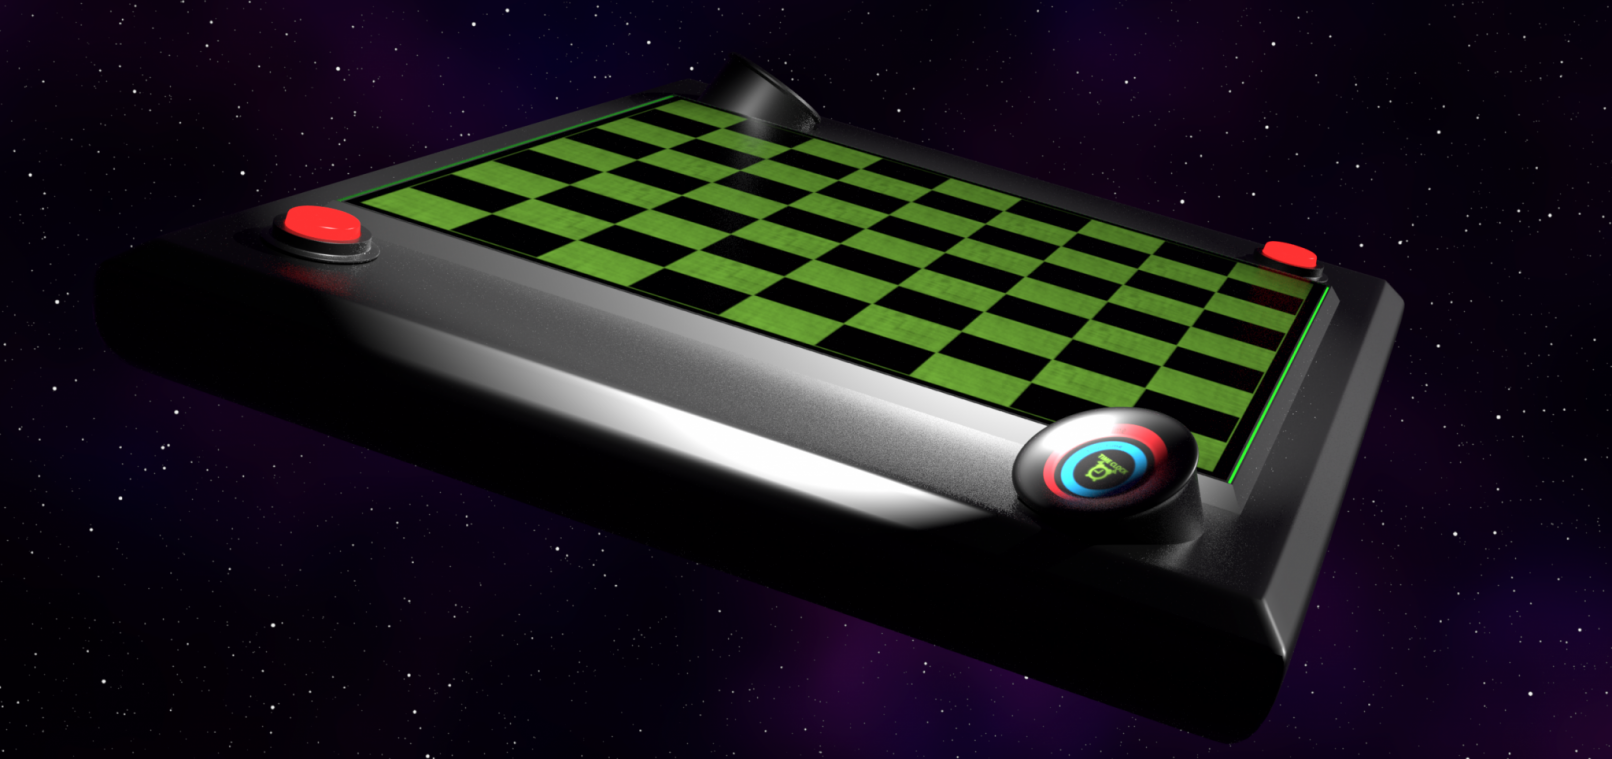 3D Model Chess Board design floating in Space